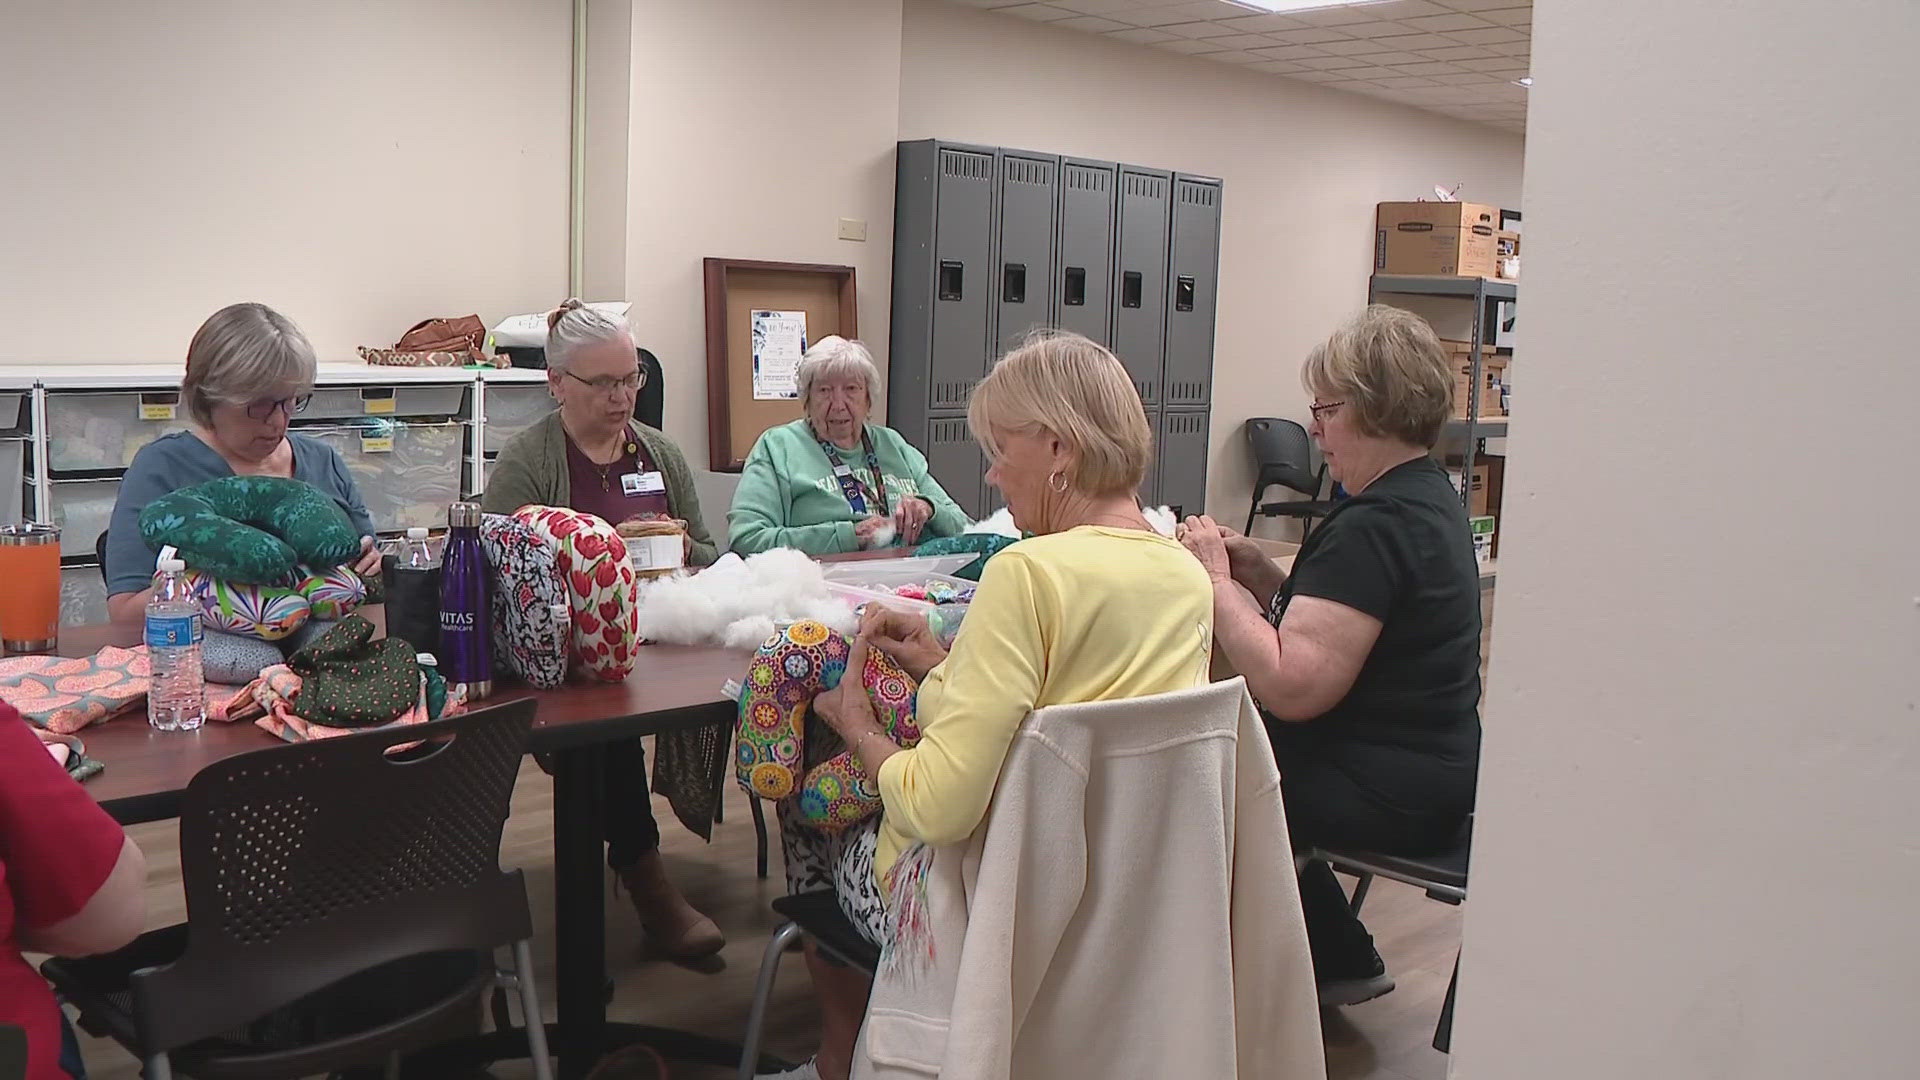 More than 100 members create stuffed animals, fleece blankets and neck pillows for patients at Riverside Methodist Hospital.